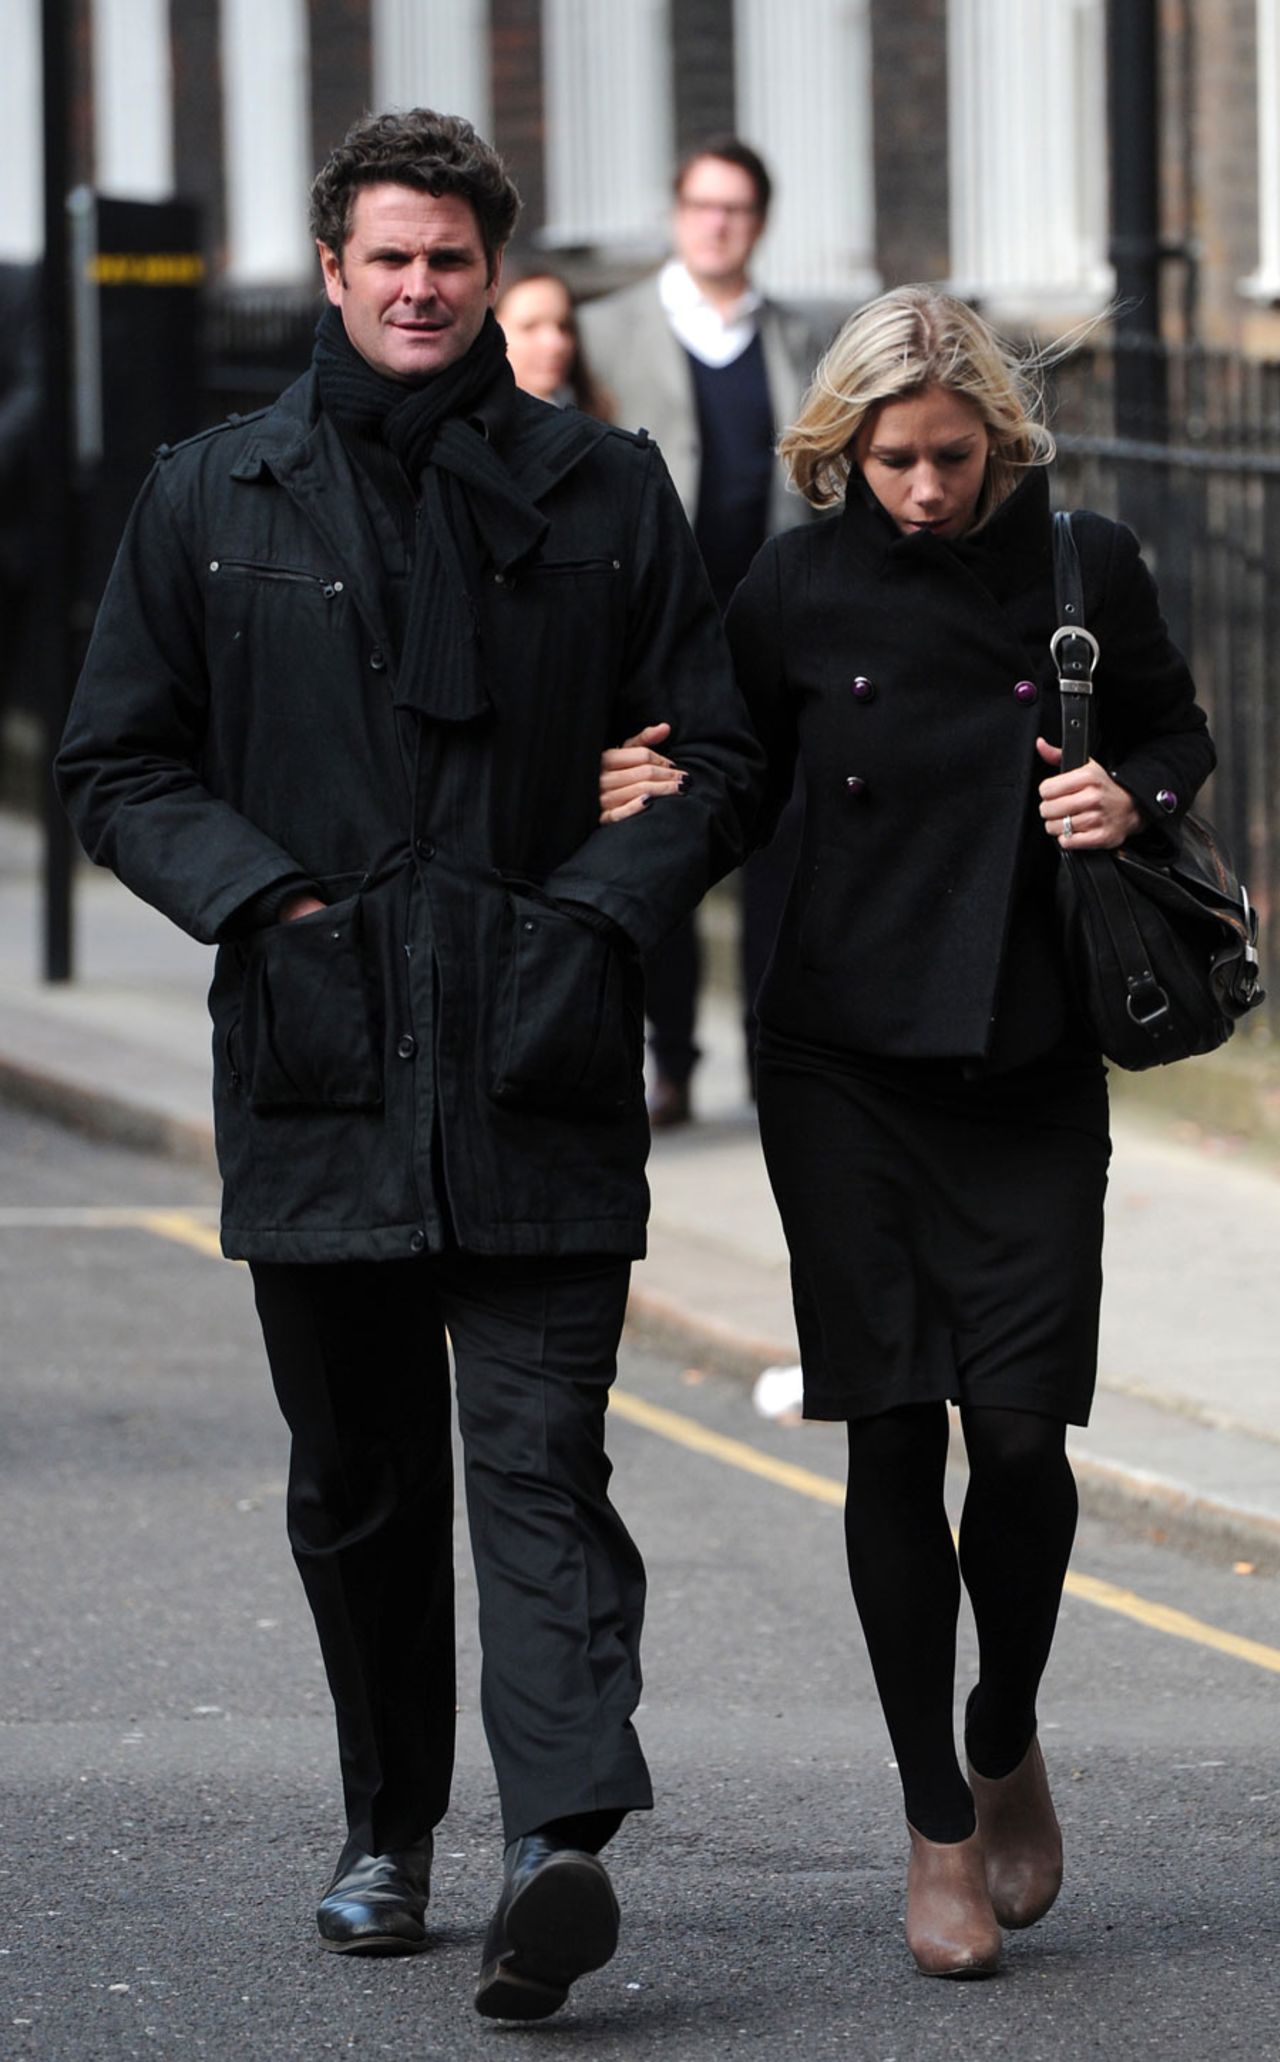 Chris Cairns and his wife outside the High Court in London, London, March 5, 2012